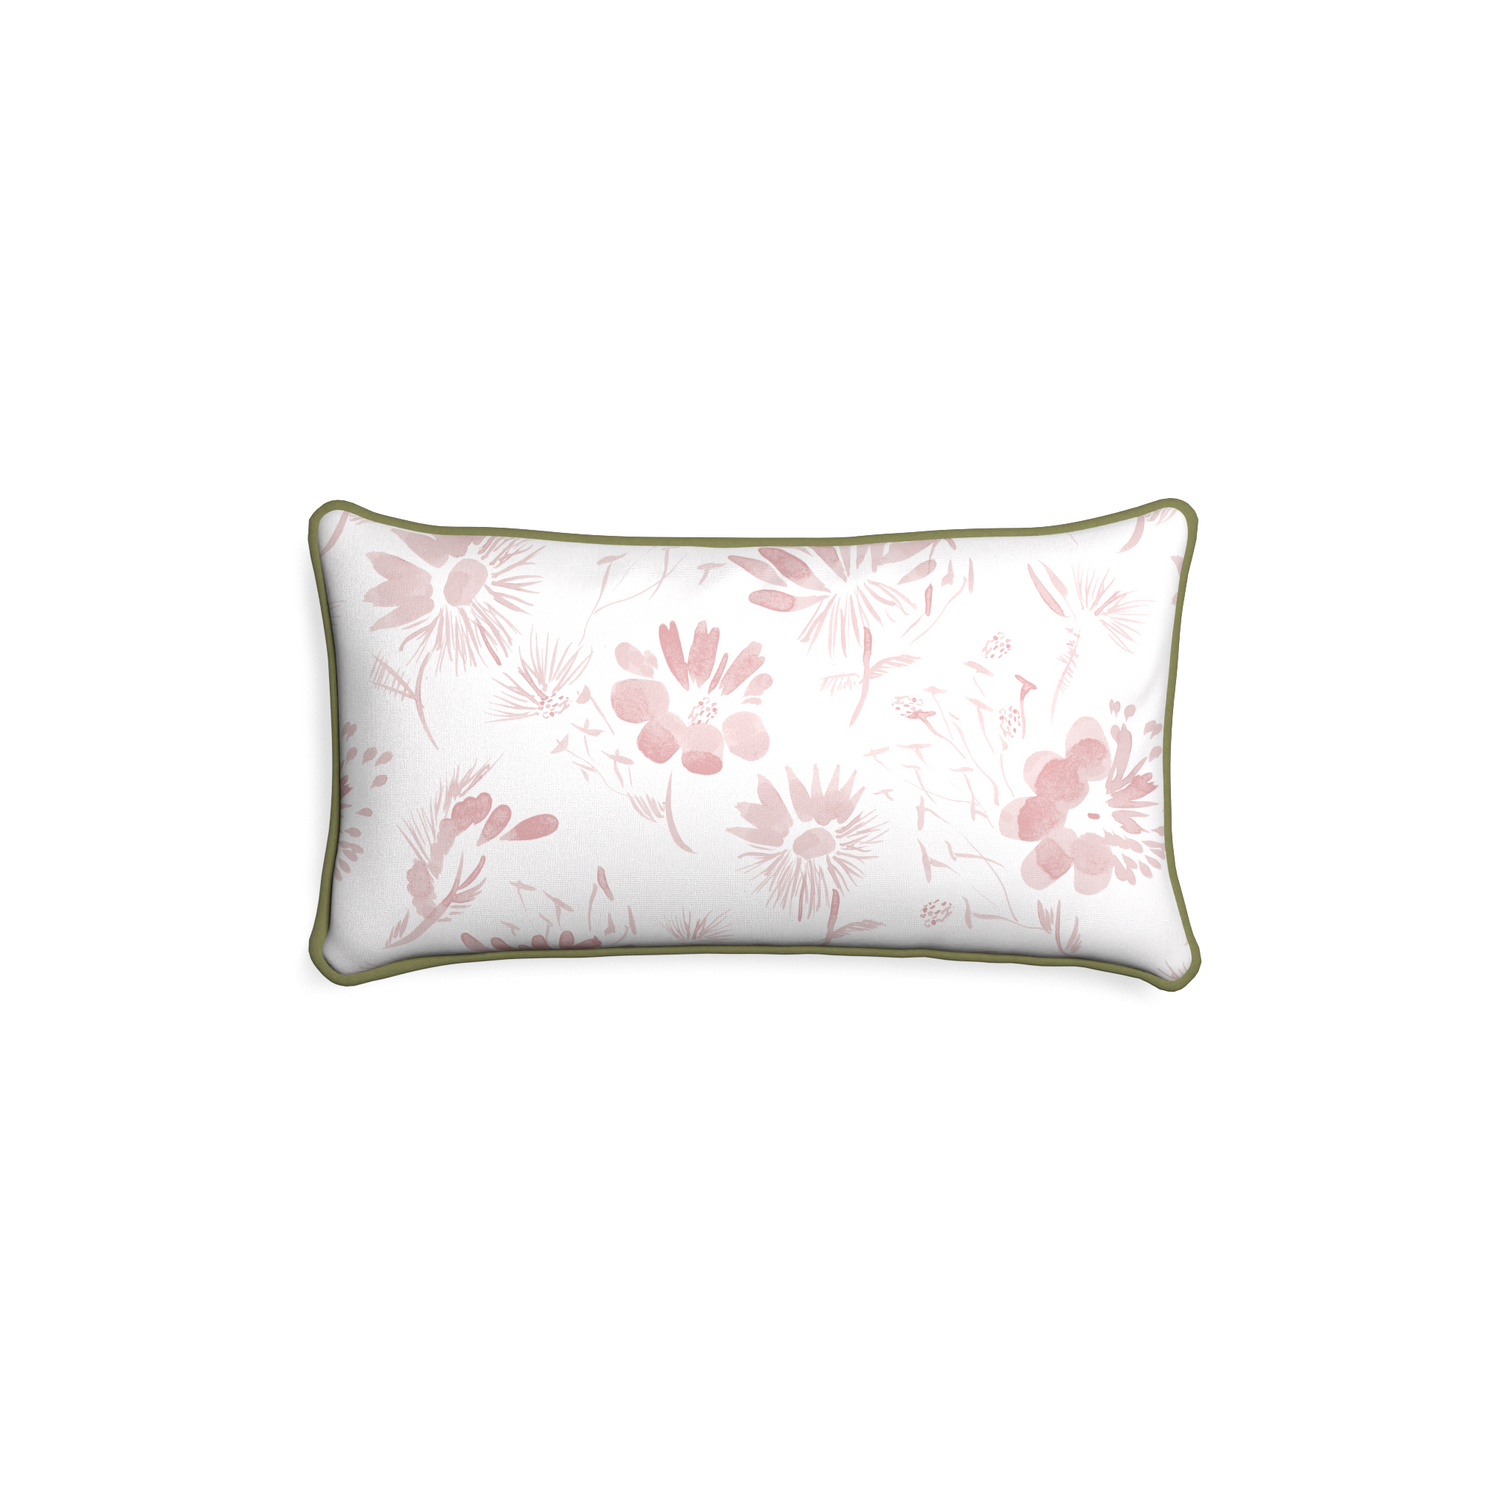 Petite-lumbar blake custom pink floralpillow with moss piping on white background